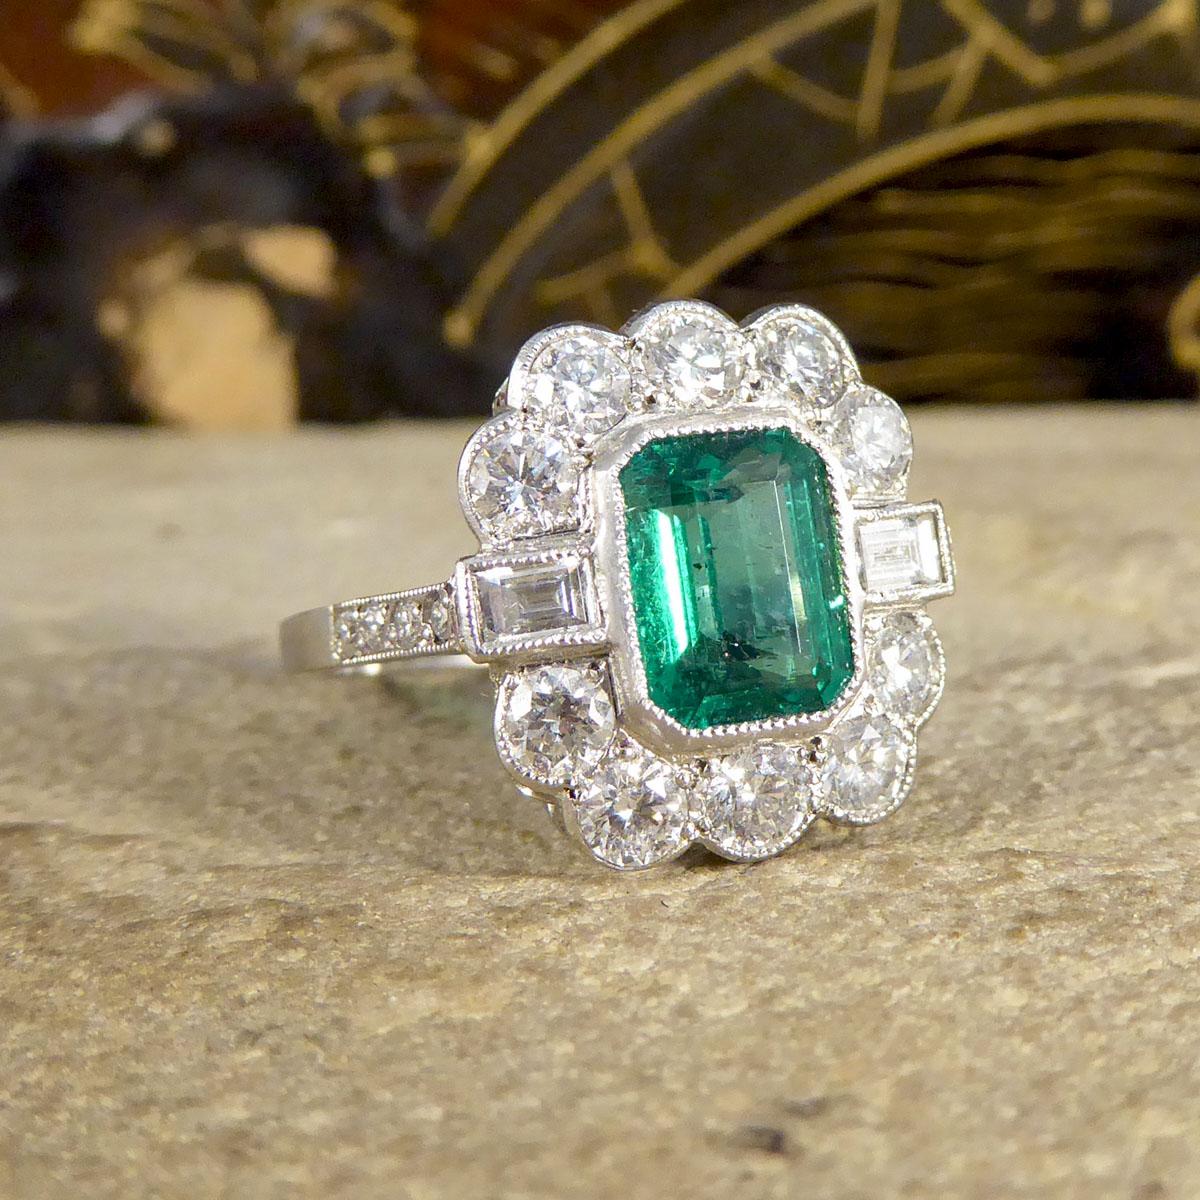 This gorgeous 1.62ct emerald cut Emerald is surrounded by 10 brilliant cut diamonds along the top and bottom of the Emerald and two baguette cut Diamonds to either side creating a cluster. With small Diamonds adorning the shoulders of this ring